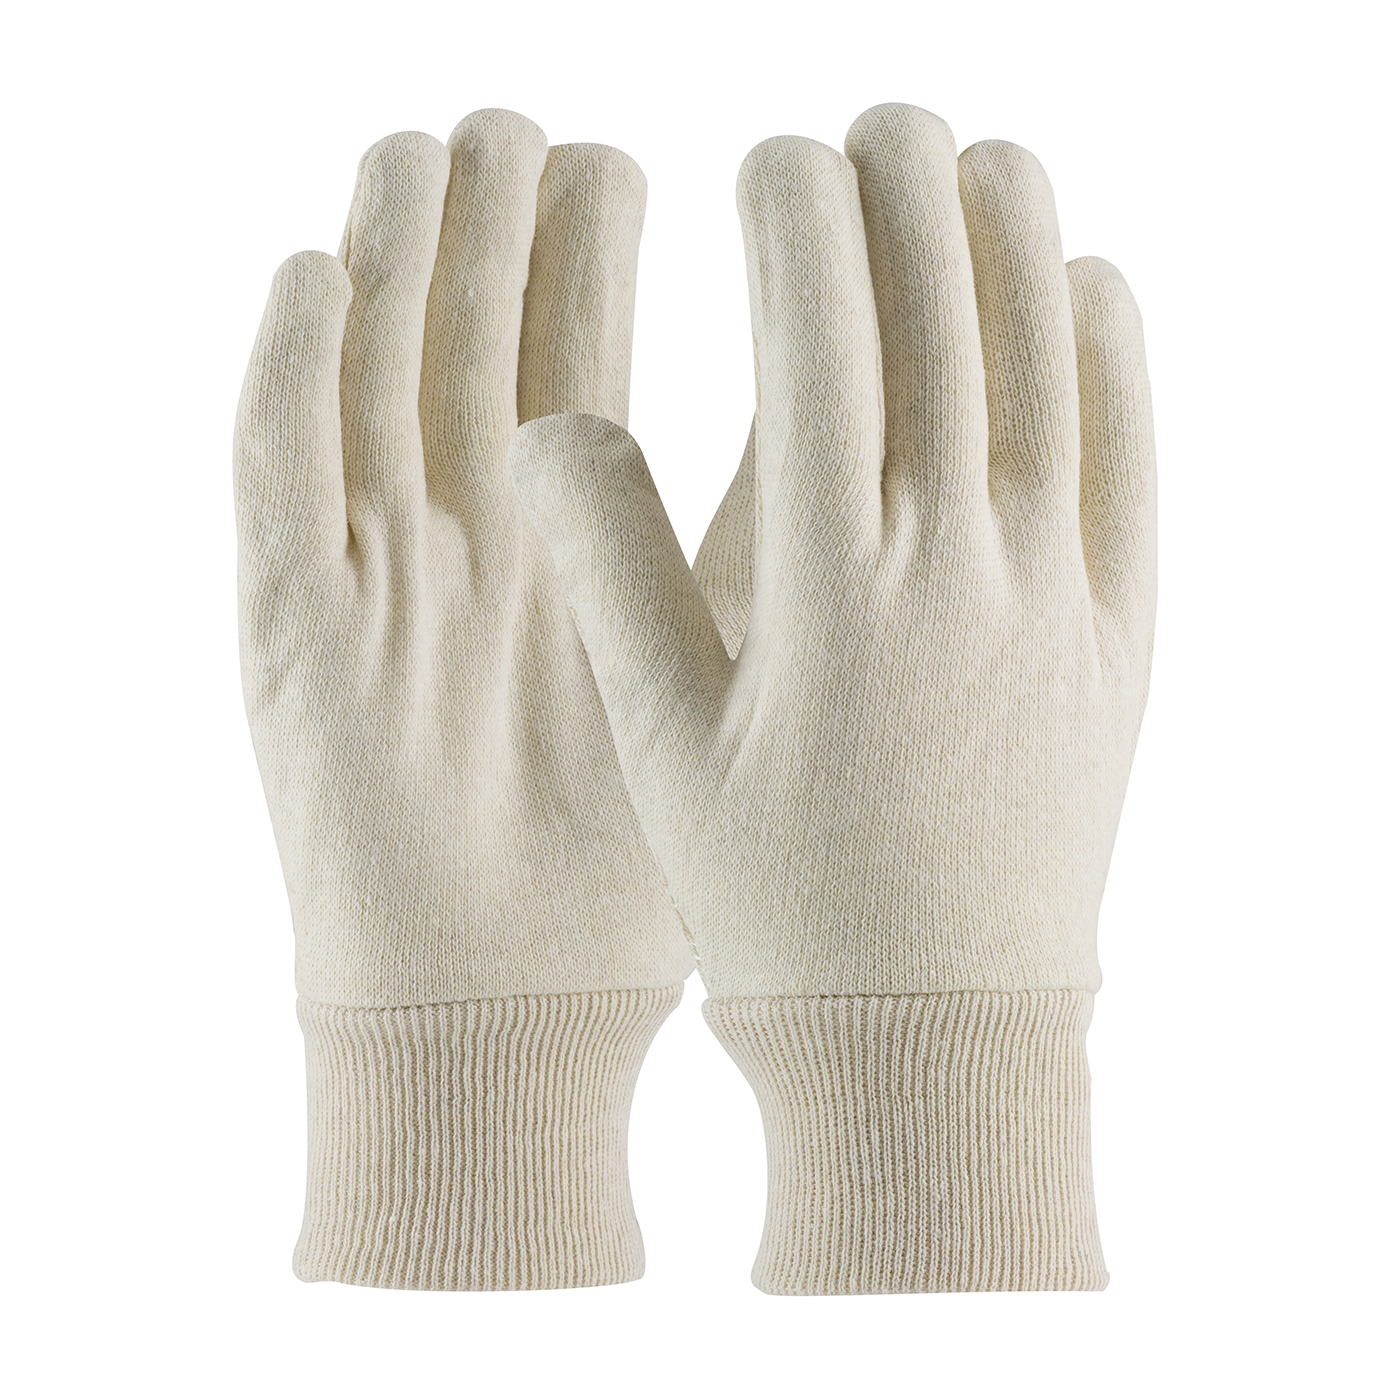 PIP® KJ55I Reversible Unisex General Purpose Gloves, Work, Clute Cut/Full Finger Style, L, Cotton/Jersey Palm, Cotton/Jersey, White, Knit Wrist Cuff, Resists: Abrasion